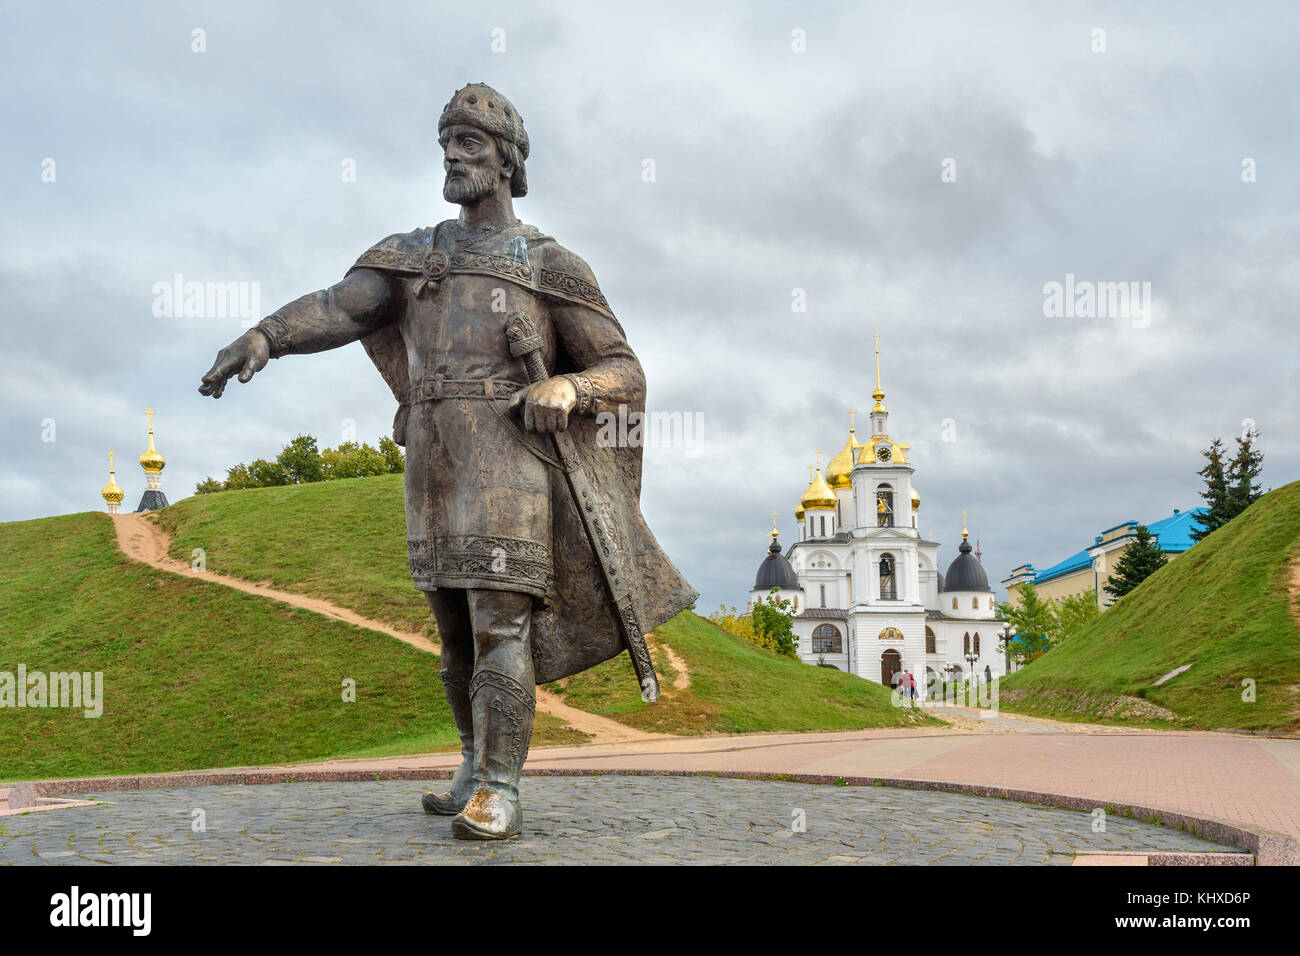 Dmitrov, Russia - September 22, 2017: Monument Old Russian Prince Yuri Dolgoruky. Cathedral of the Assumption in Dmitrov Kremlin on the background Stock Photo